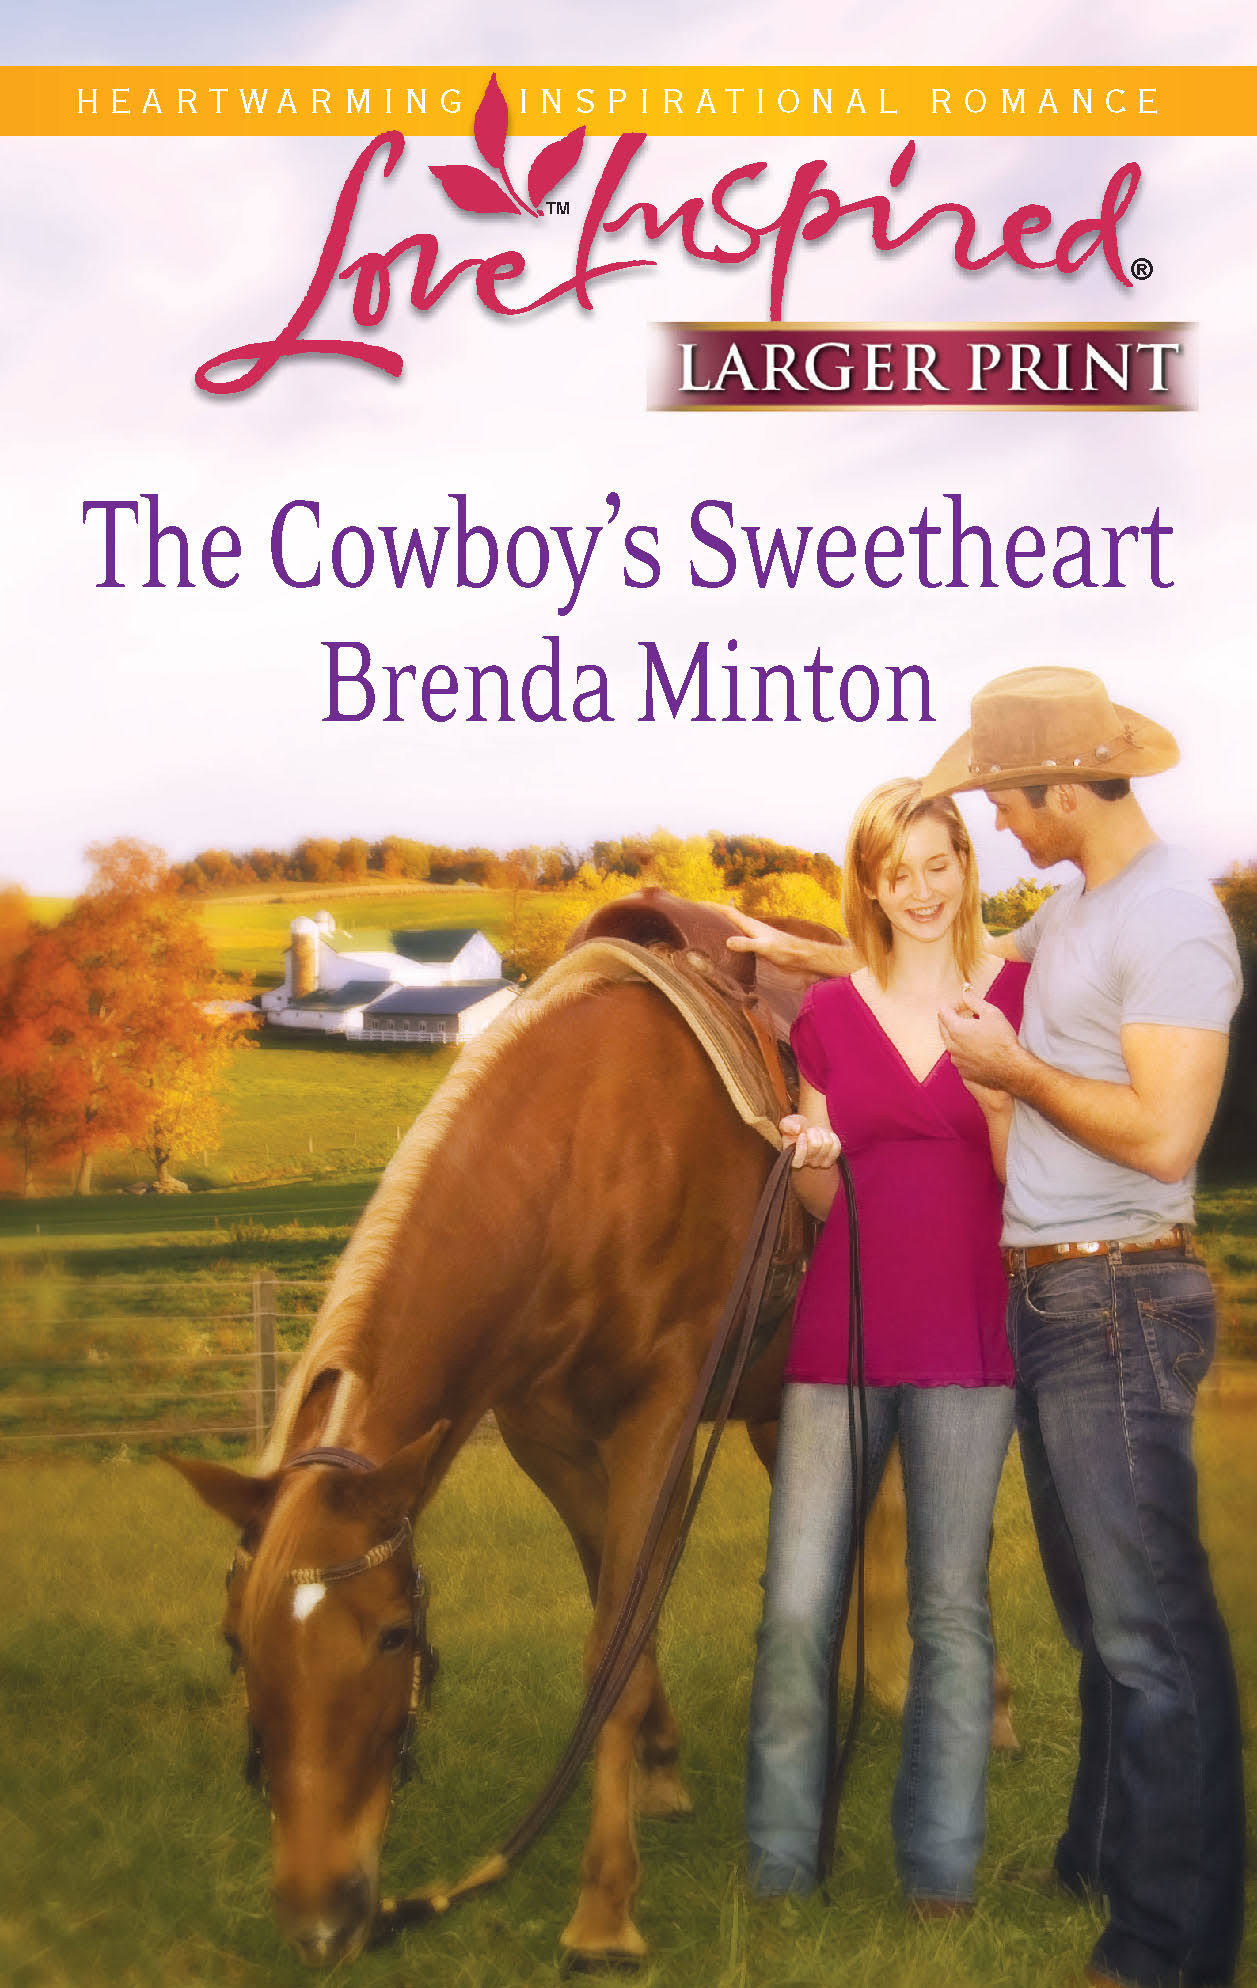 The Cowboy's Sweetheart [Book]